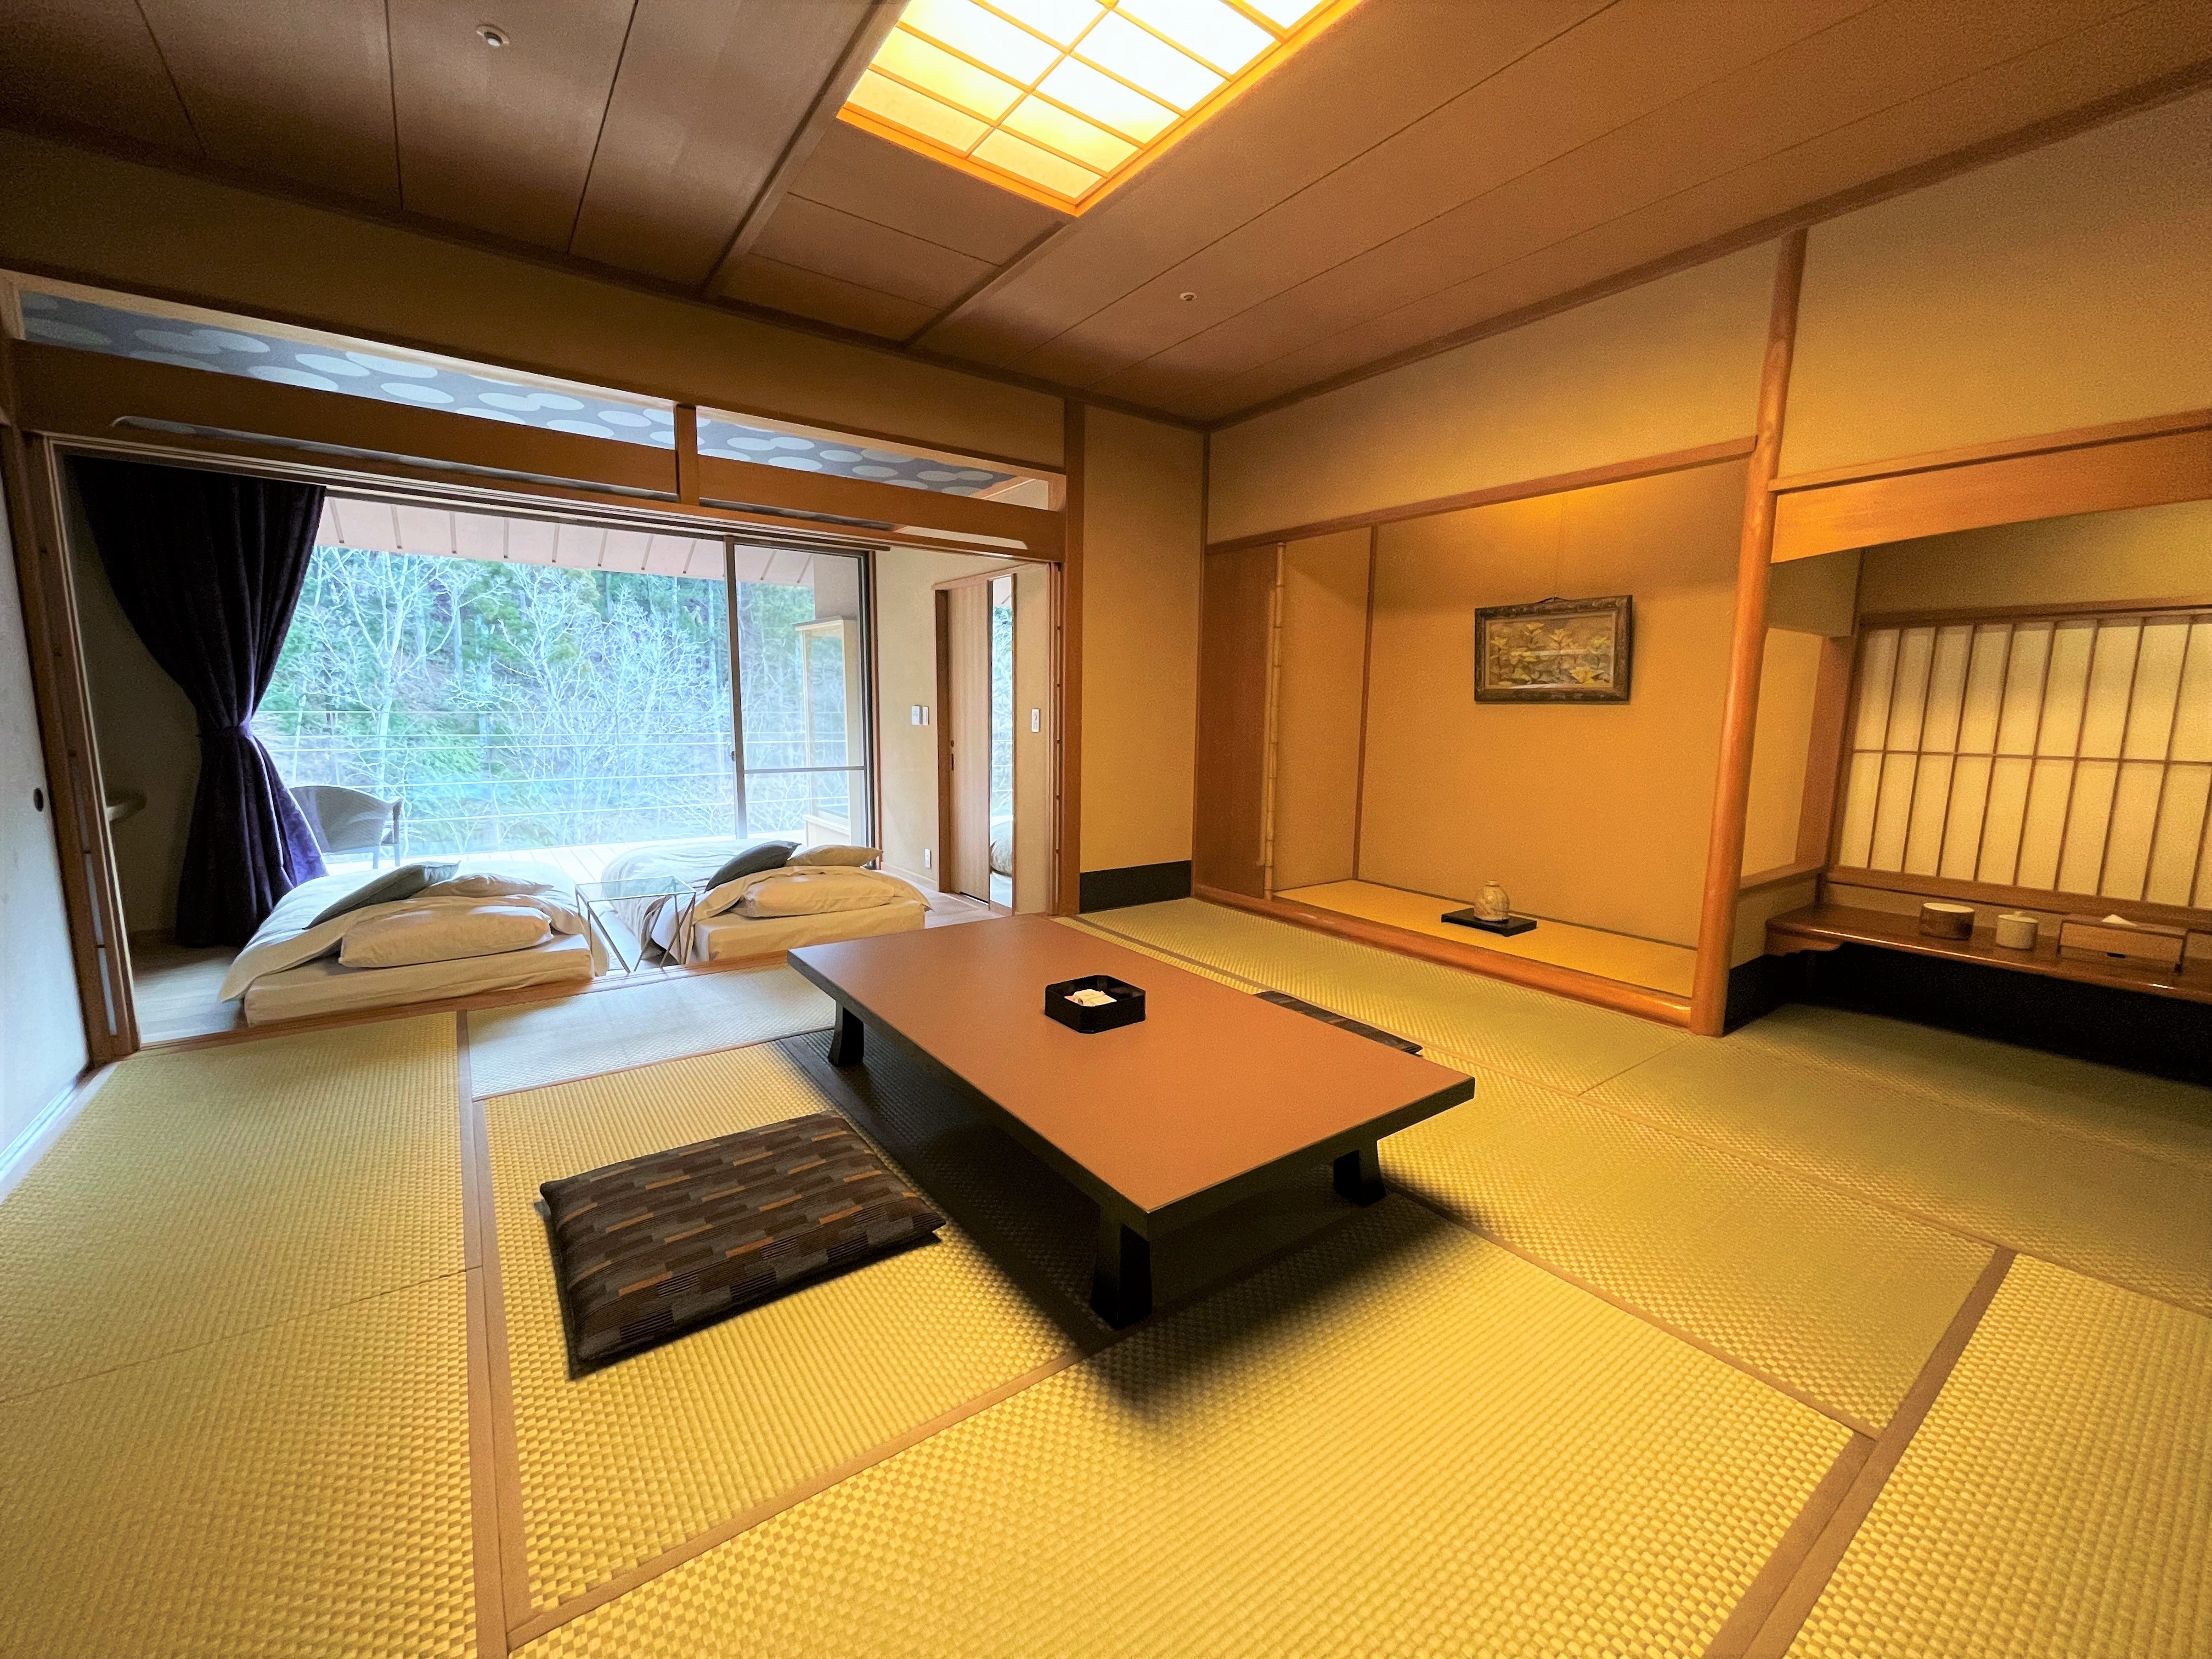 Semi-open-air hot spring & terrace + guest room with bed (image)